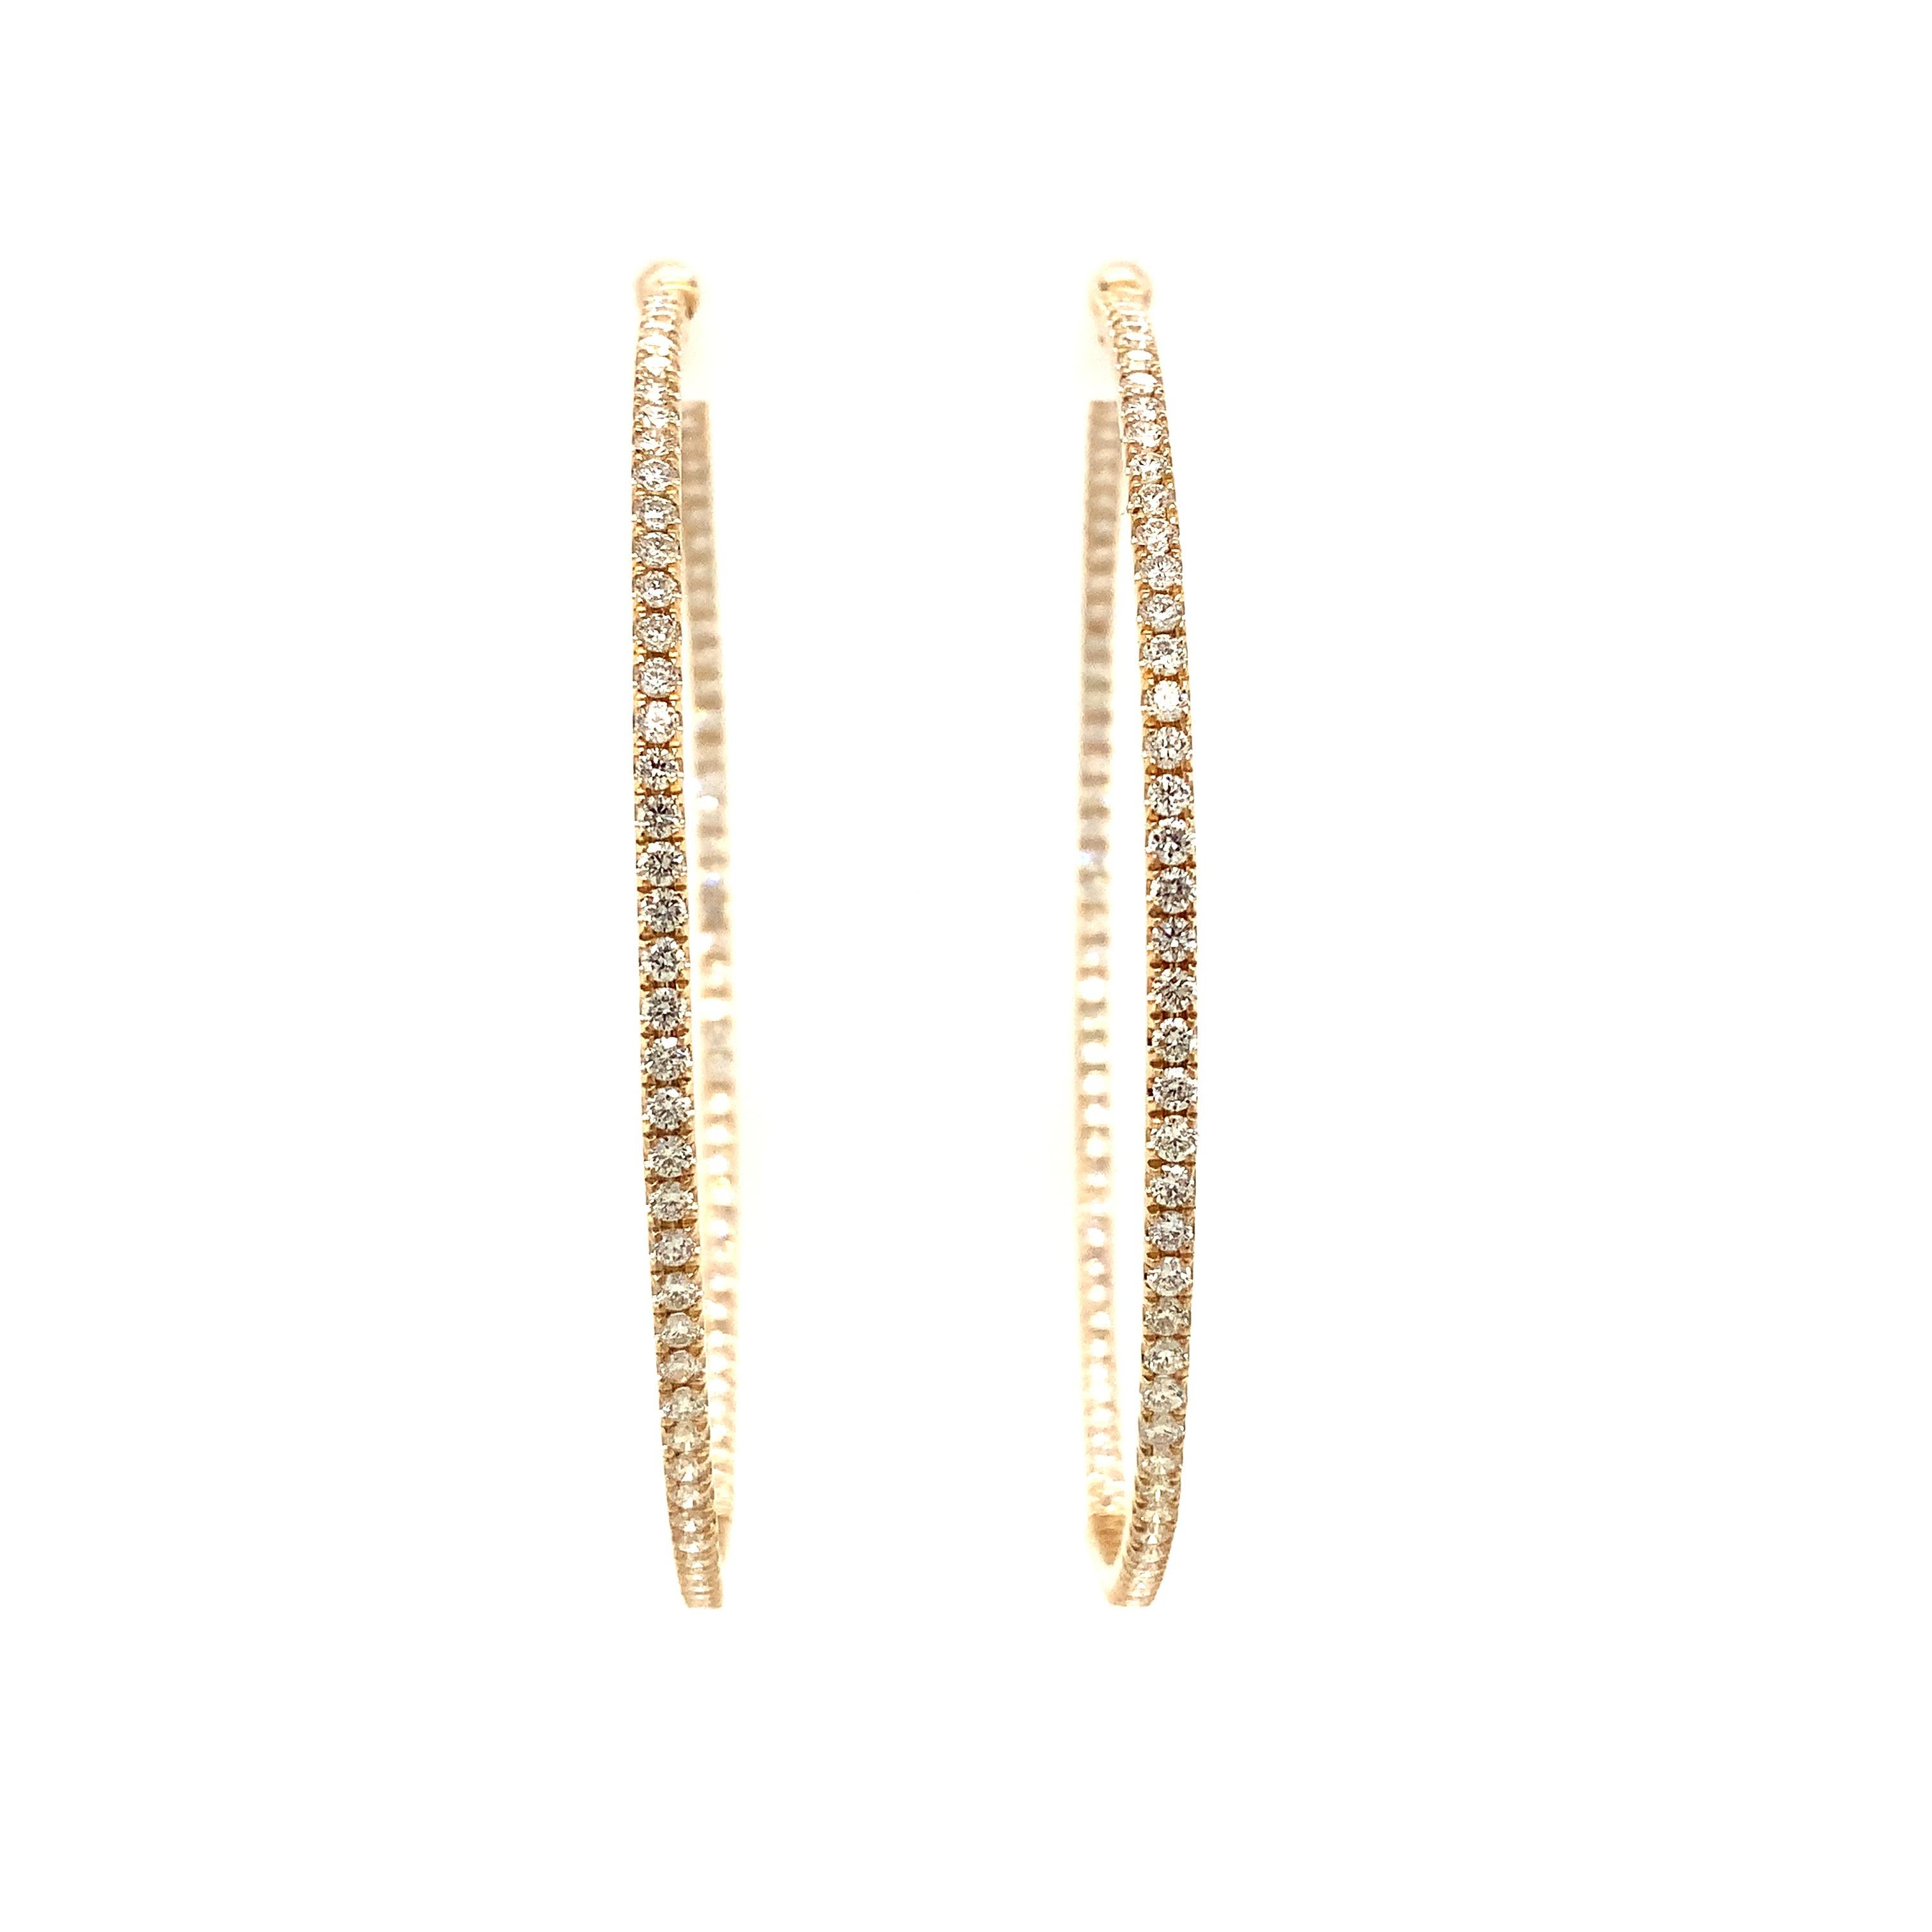 Roman + Jules Two Inch Diameter Round Shared Prong Diamond Hoop Set in 14K Yellow Gold Post with Locking clutch Back for Security.  These Chicque Hoops will make you Look and Feel Great! Everyone should have a pair of these!
184 Round Diamond =2.00